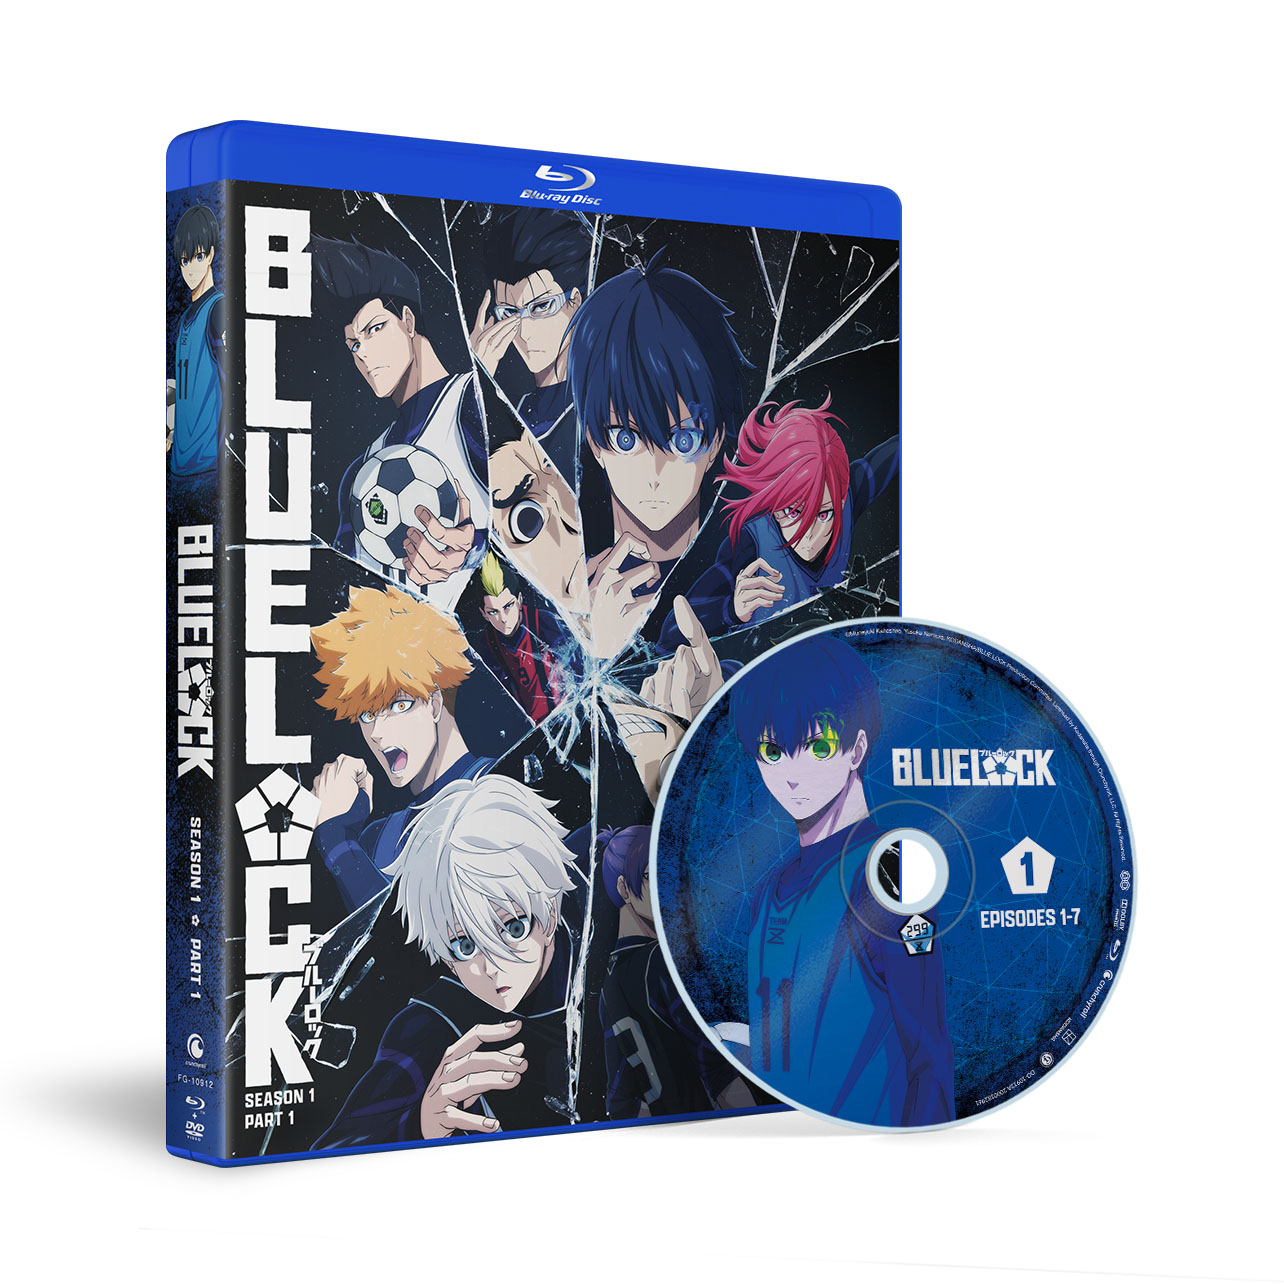 DVD BLUELOCK Episode 1-24 END English Dubbed All Region FREESHIP